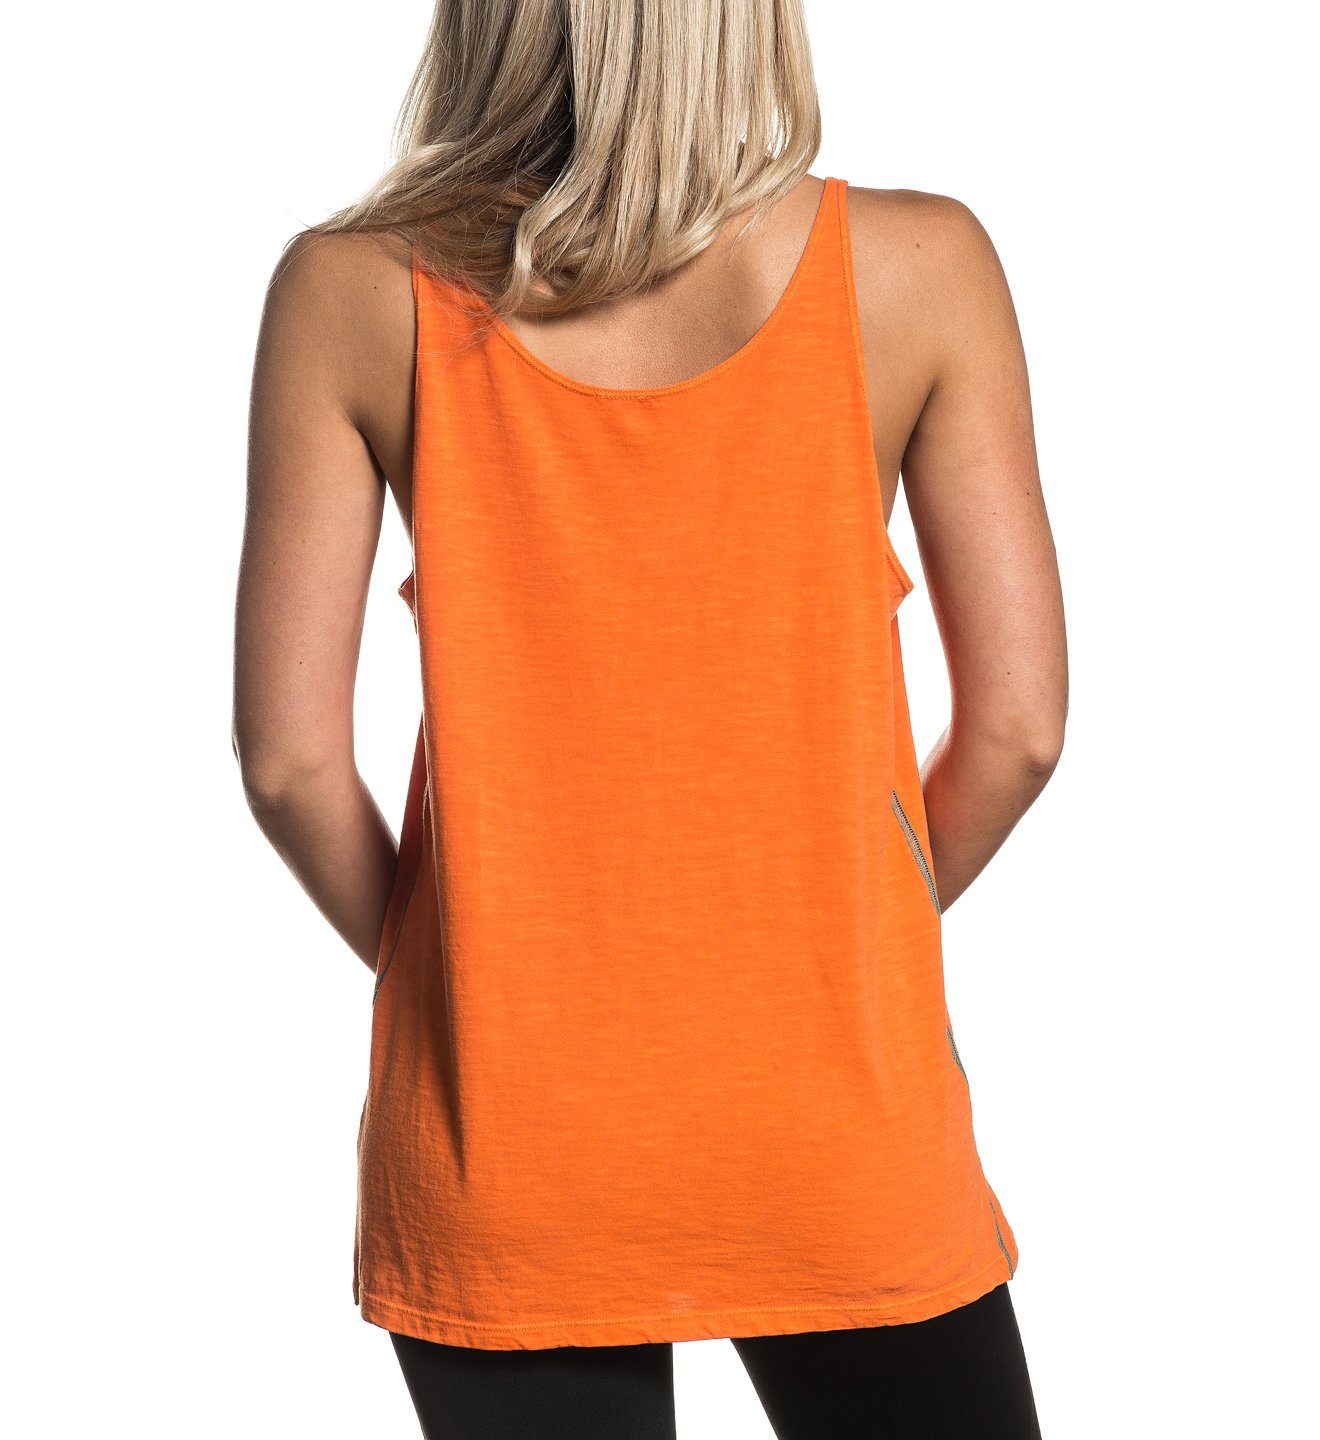 Anna Maria - Womens Tank Tops - American Fighter